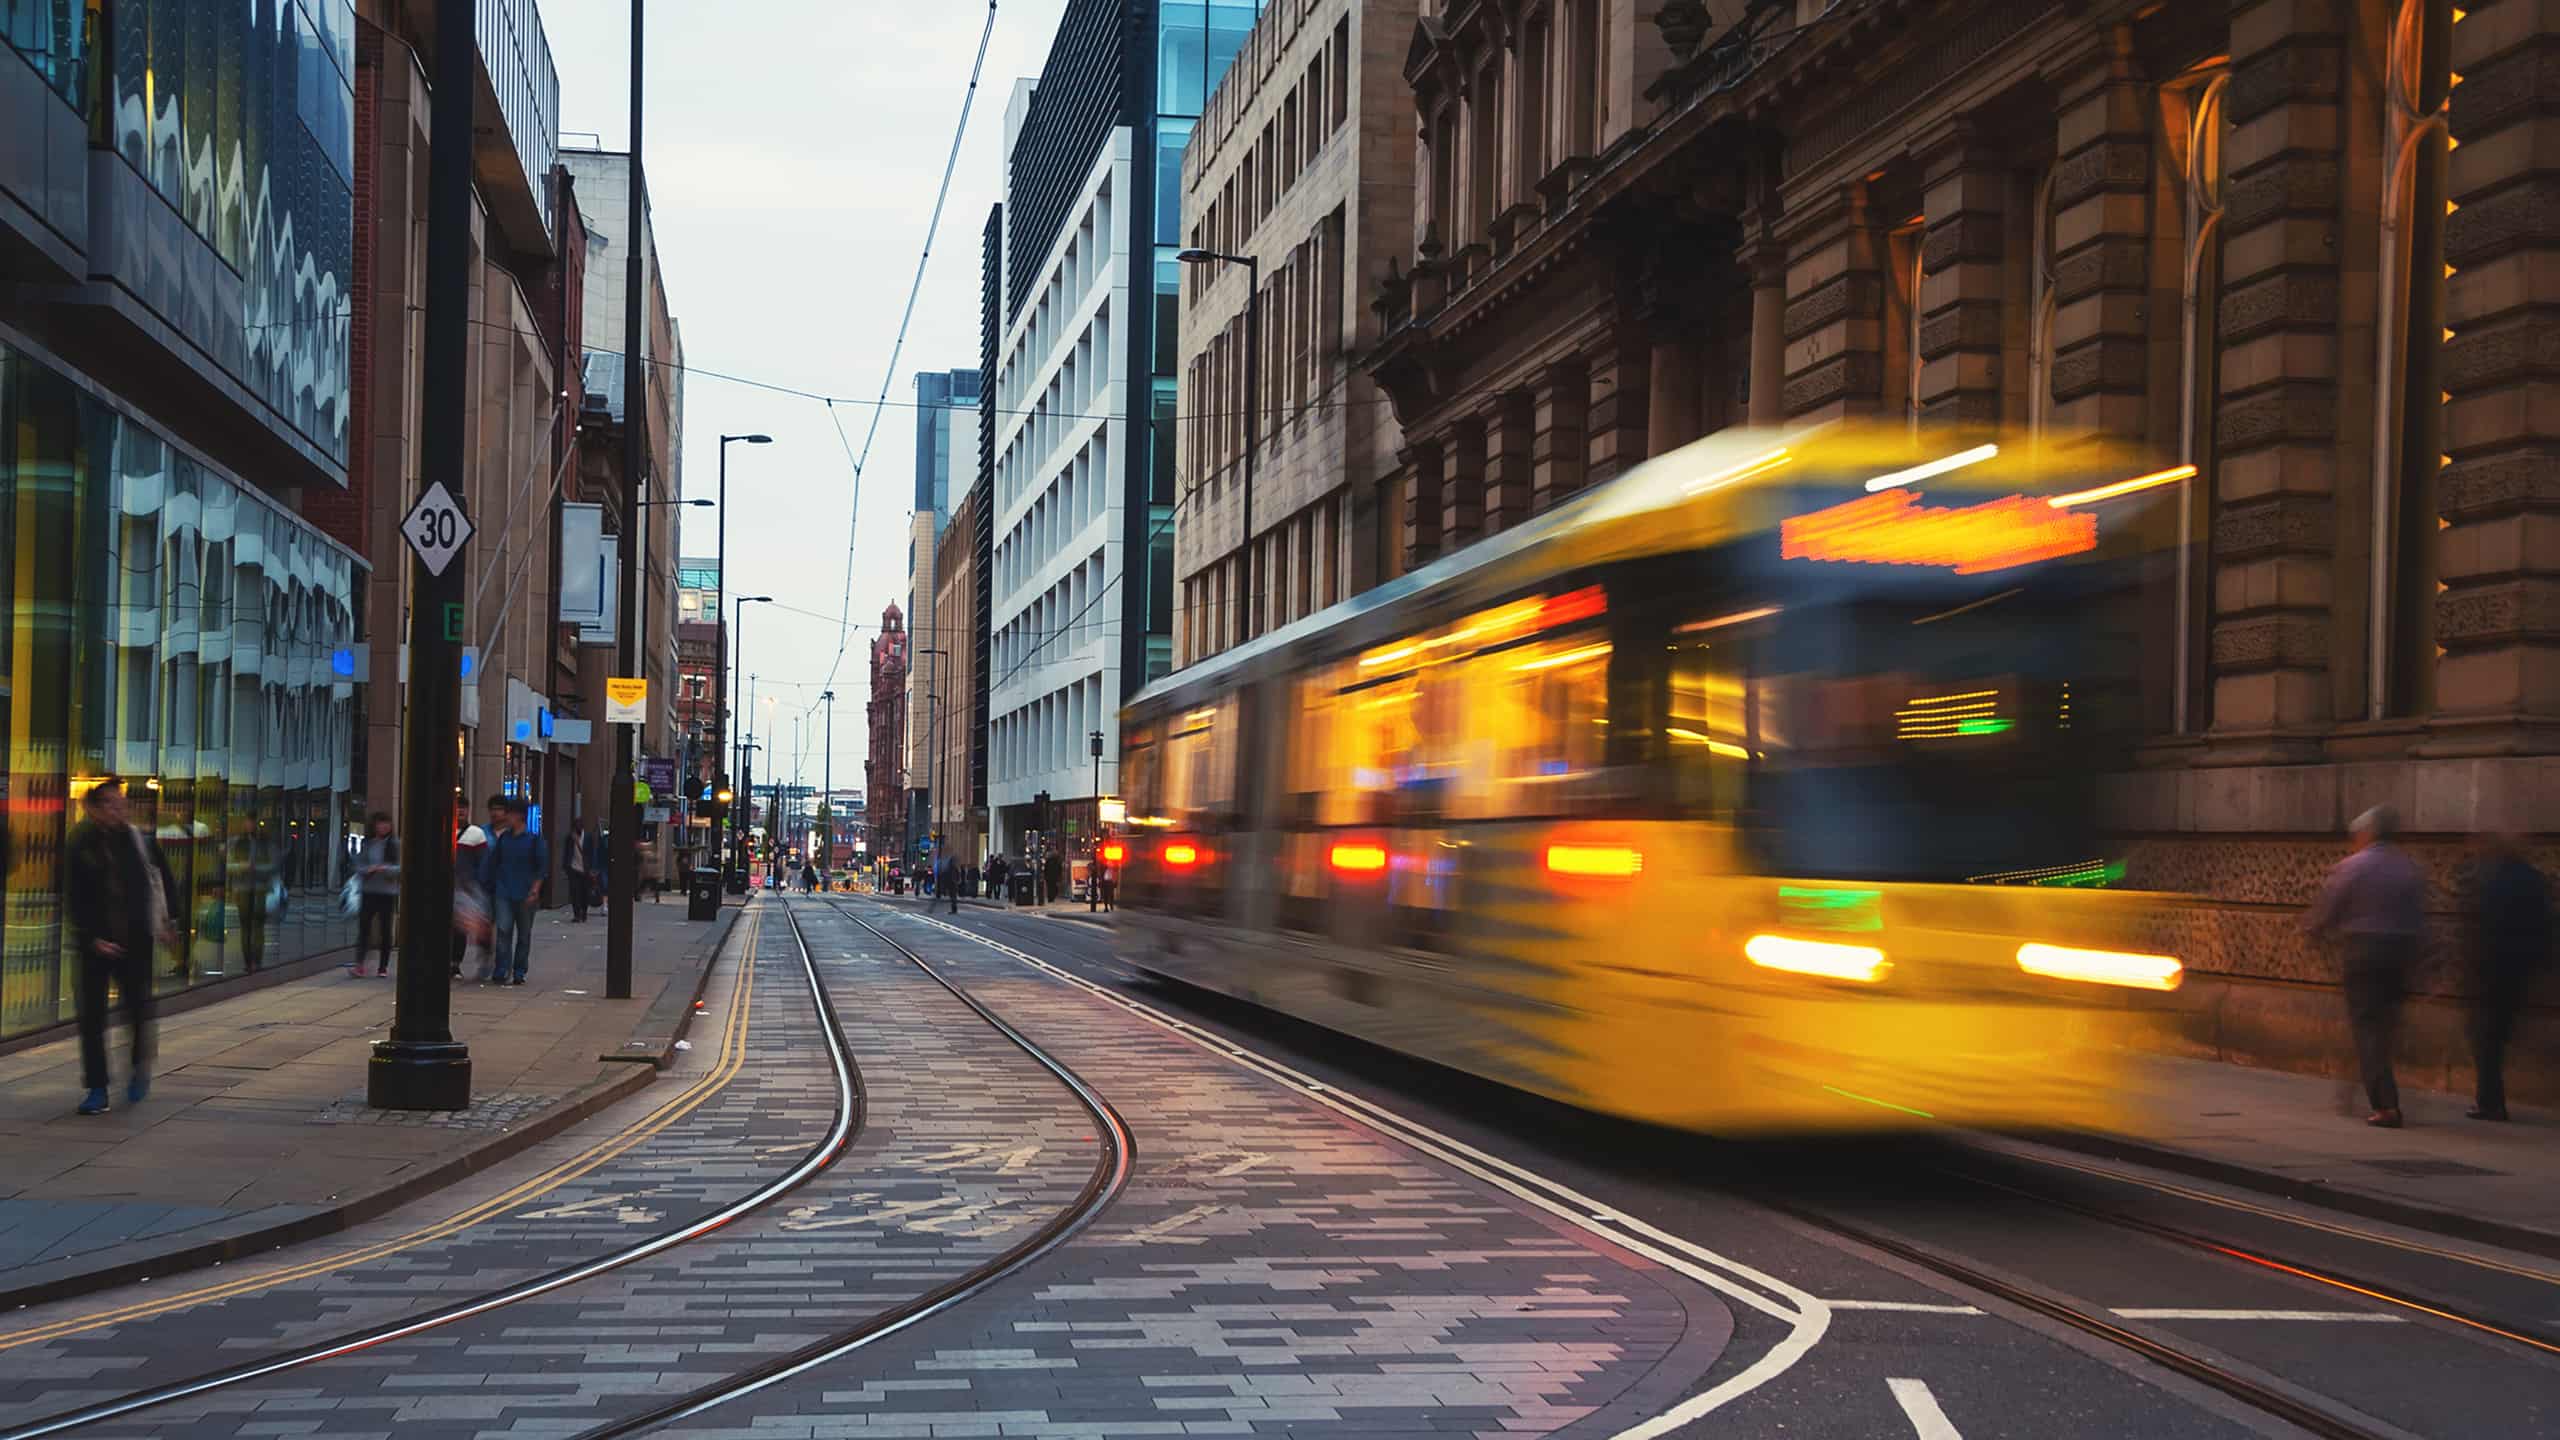 Why Live in Manchester: 15 Reasons To Make The Move